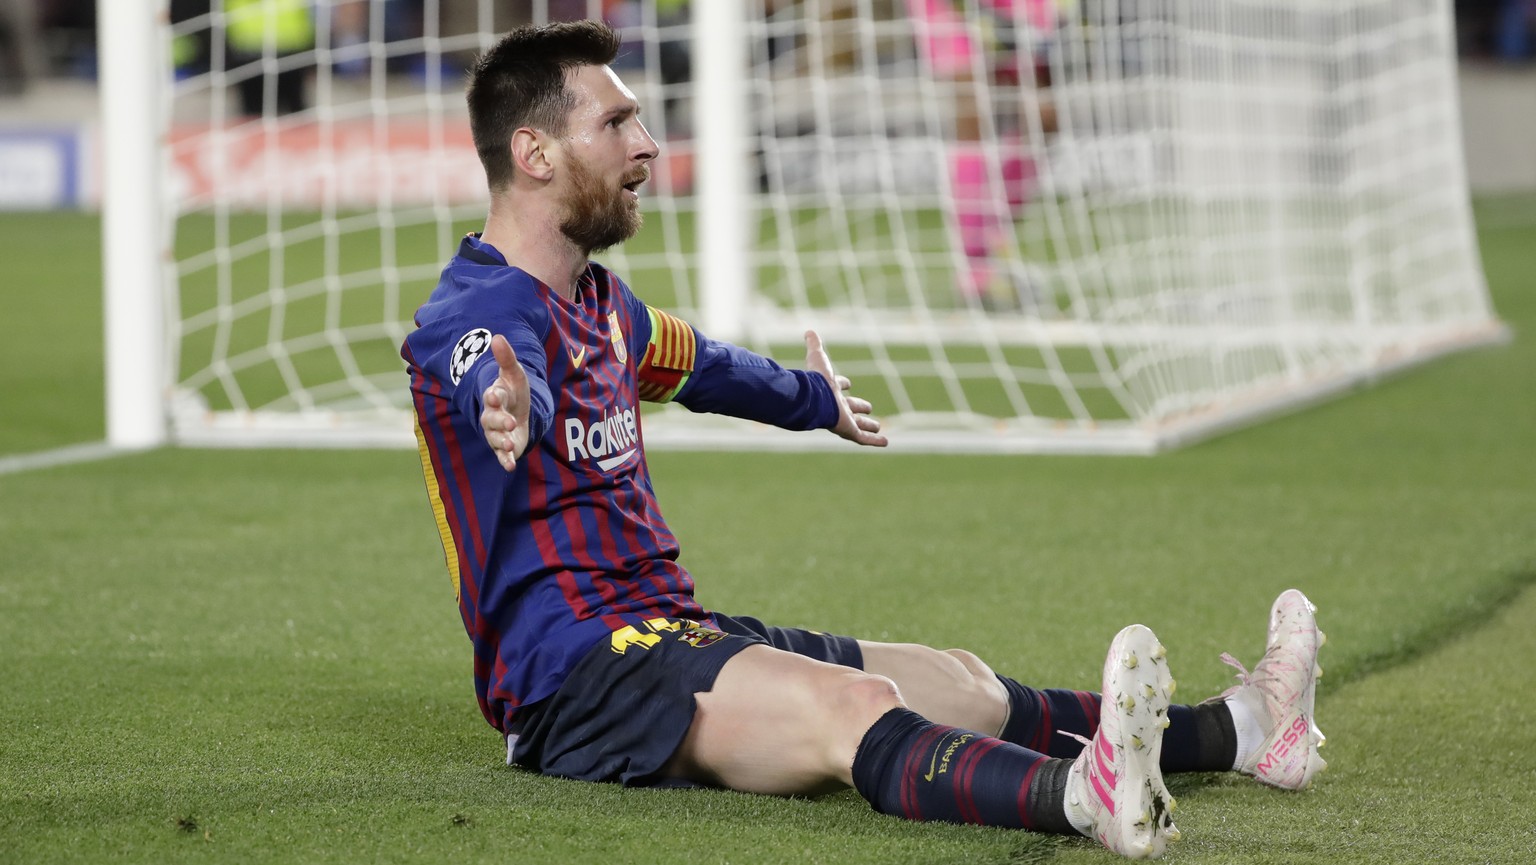 Barcelona's Lionel Messi celebrates after scoring his side's third goal during the Champions League semifinal, first leg, soccer match between FC Barcelona and Liverpool at the Camp Nou stadium in Bar ...